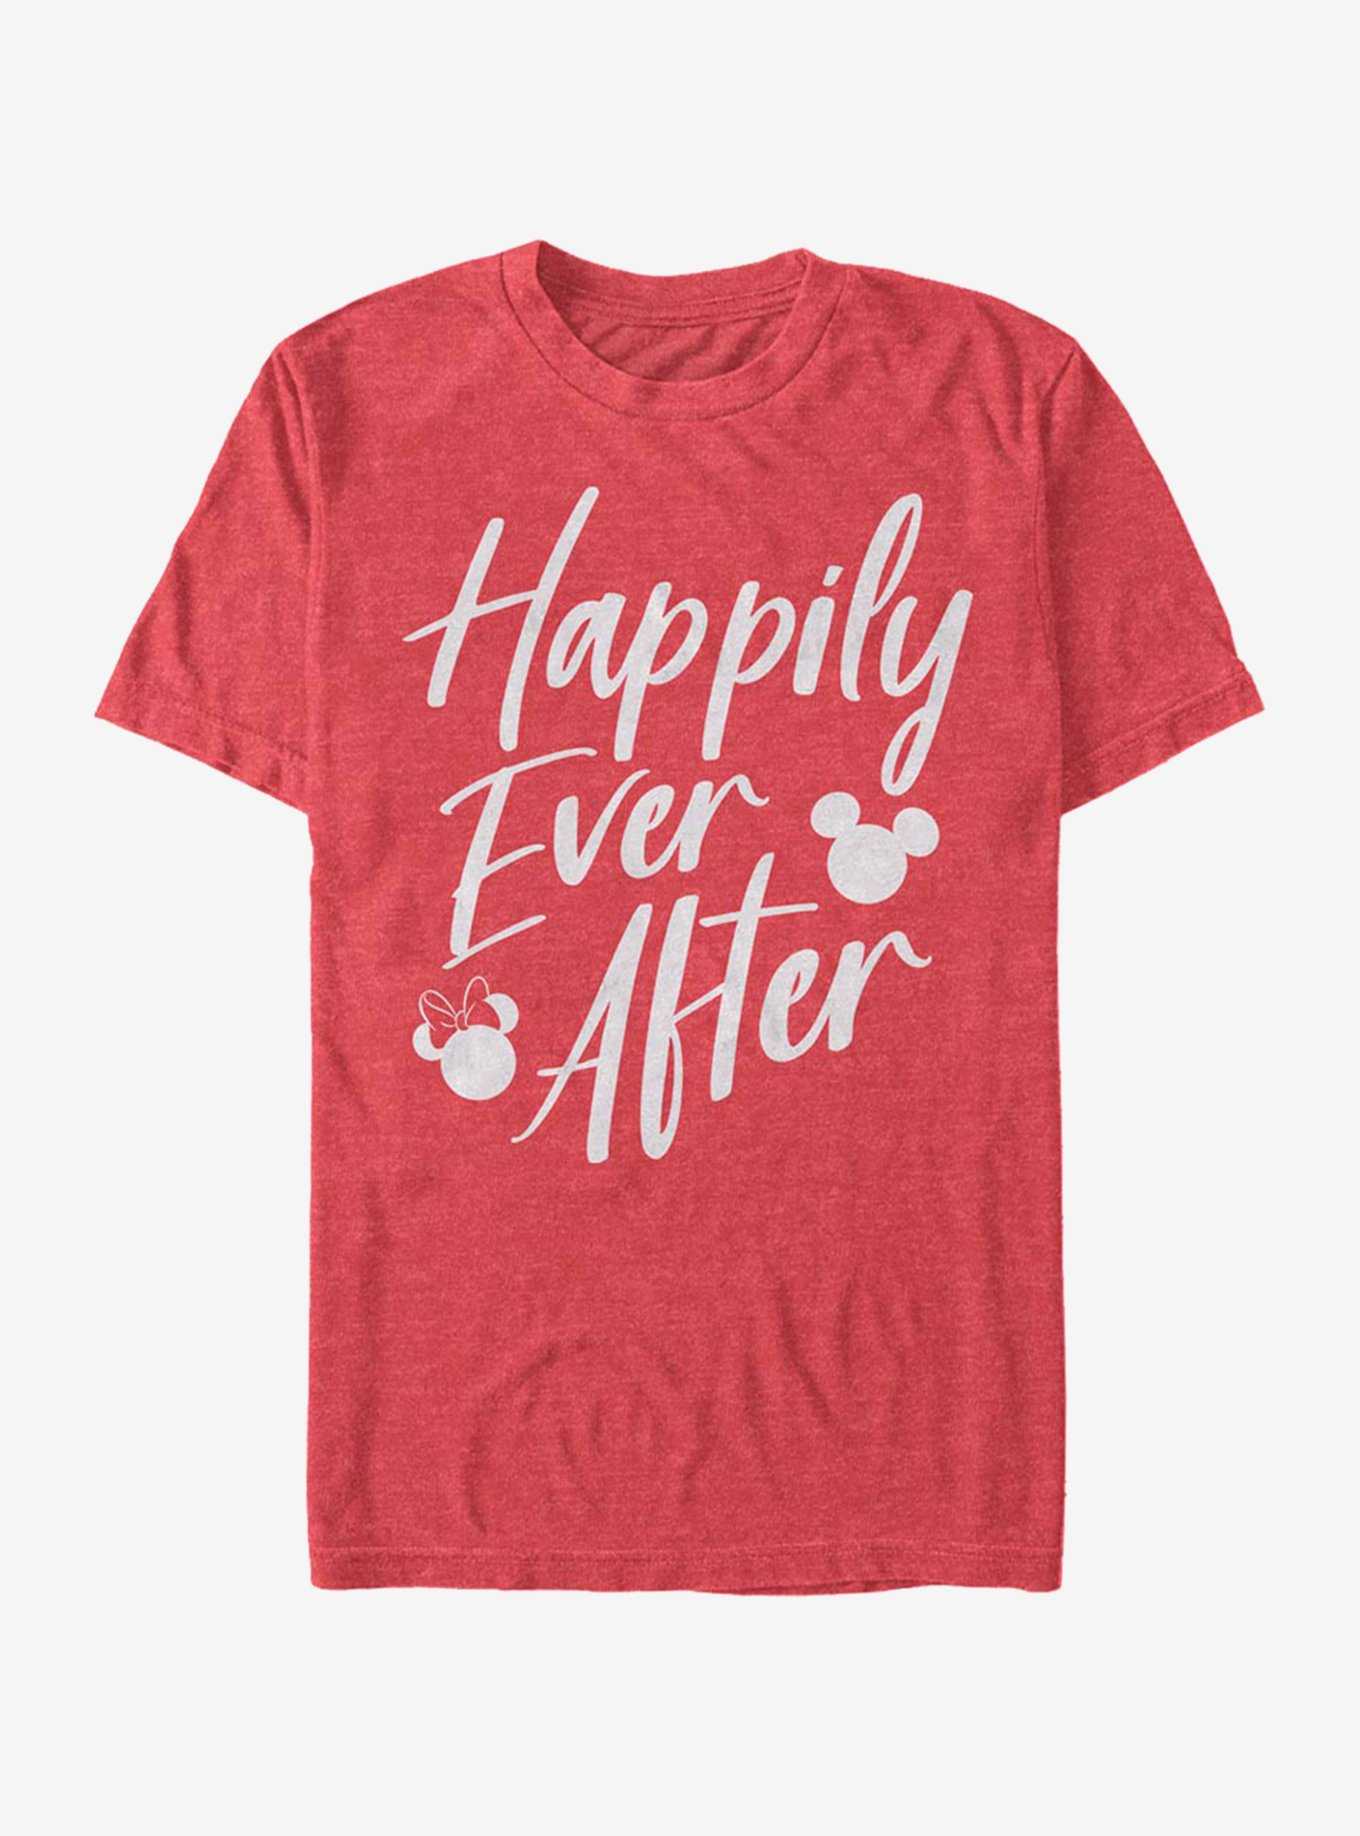 Disney Mickey Mouse Happily Ever After T-Shirt, , hi-res